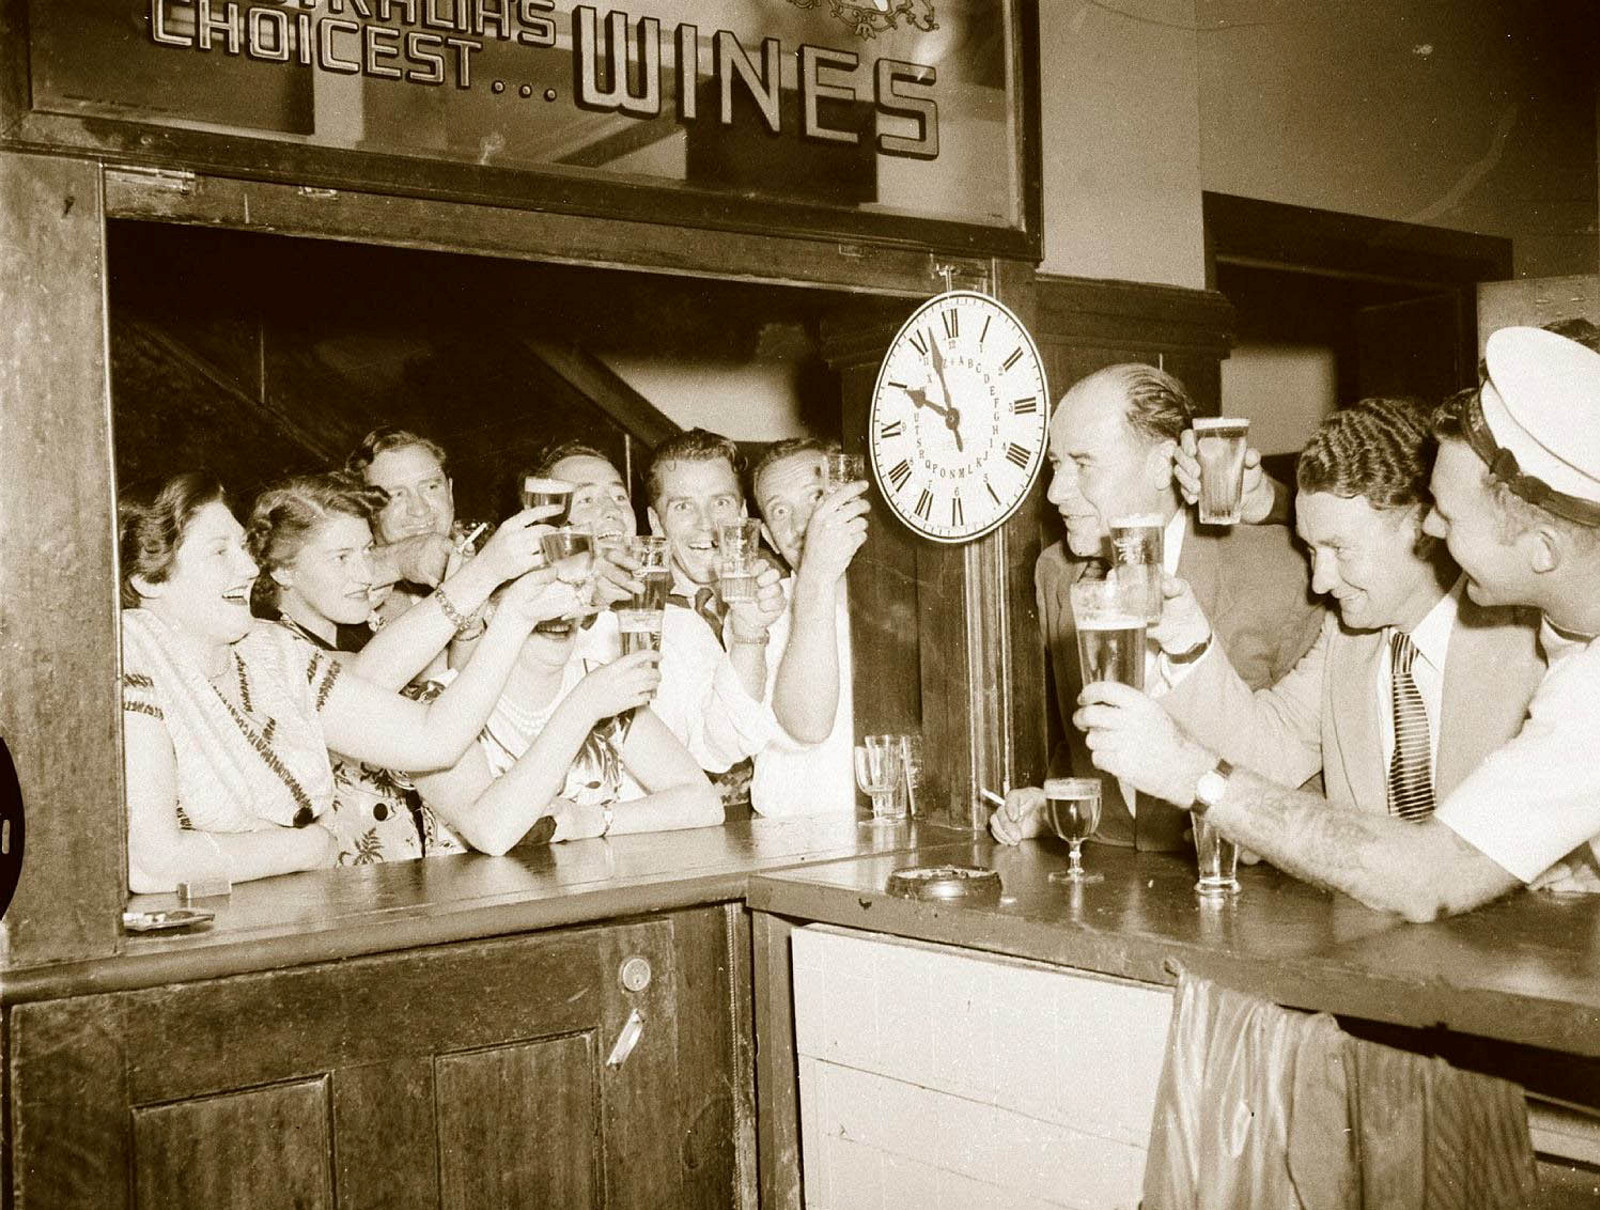 Patrons, drinks raised, crowd a pub bar with a clock showing 10 pm.